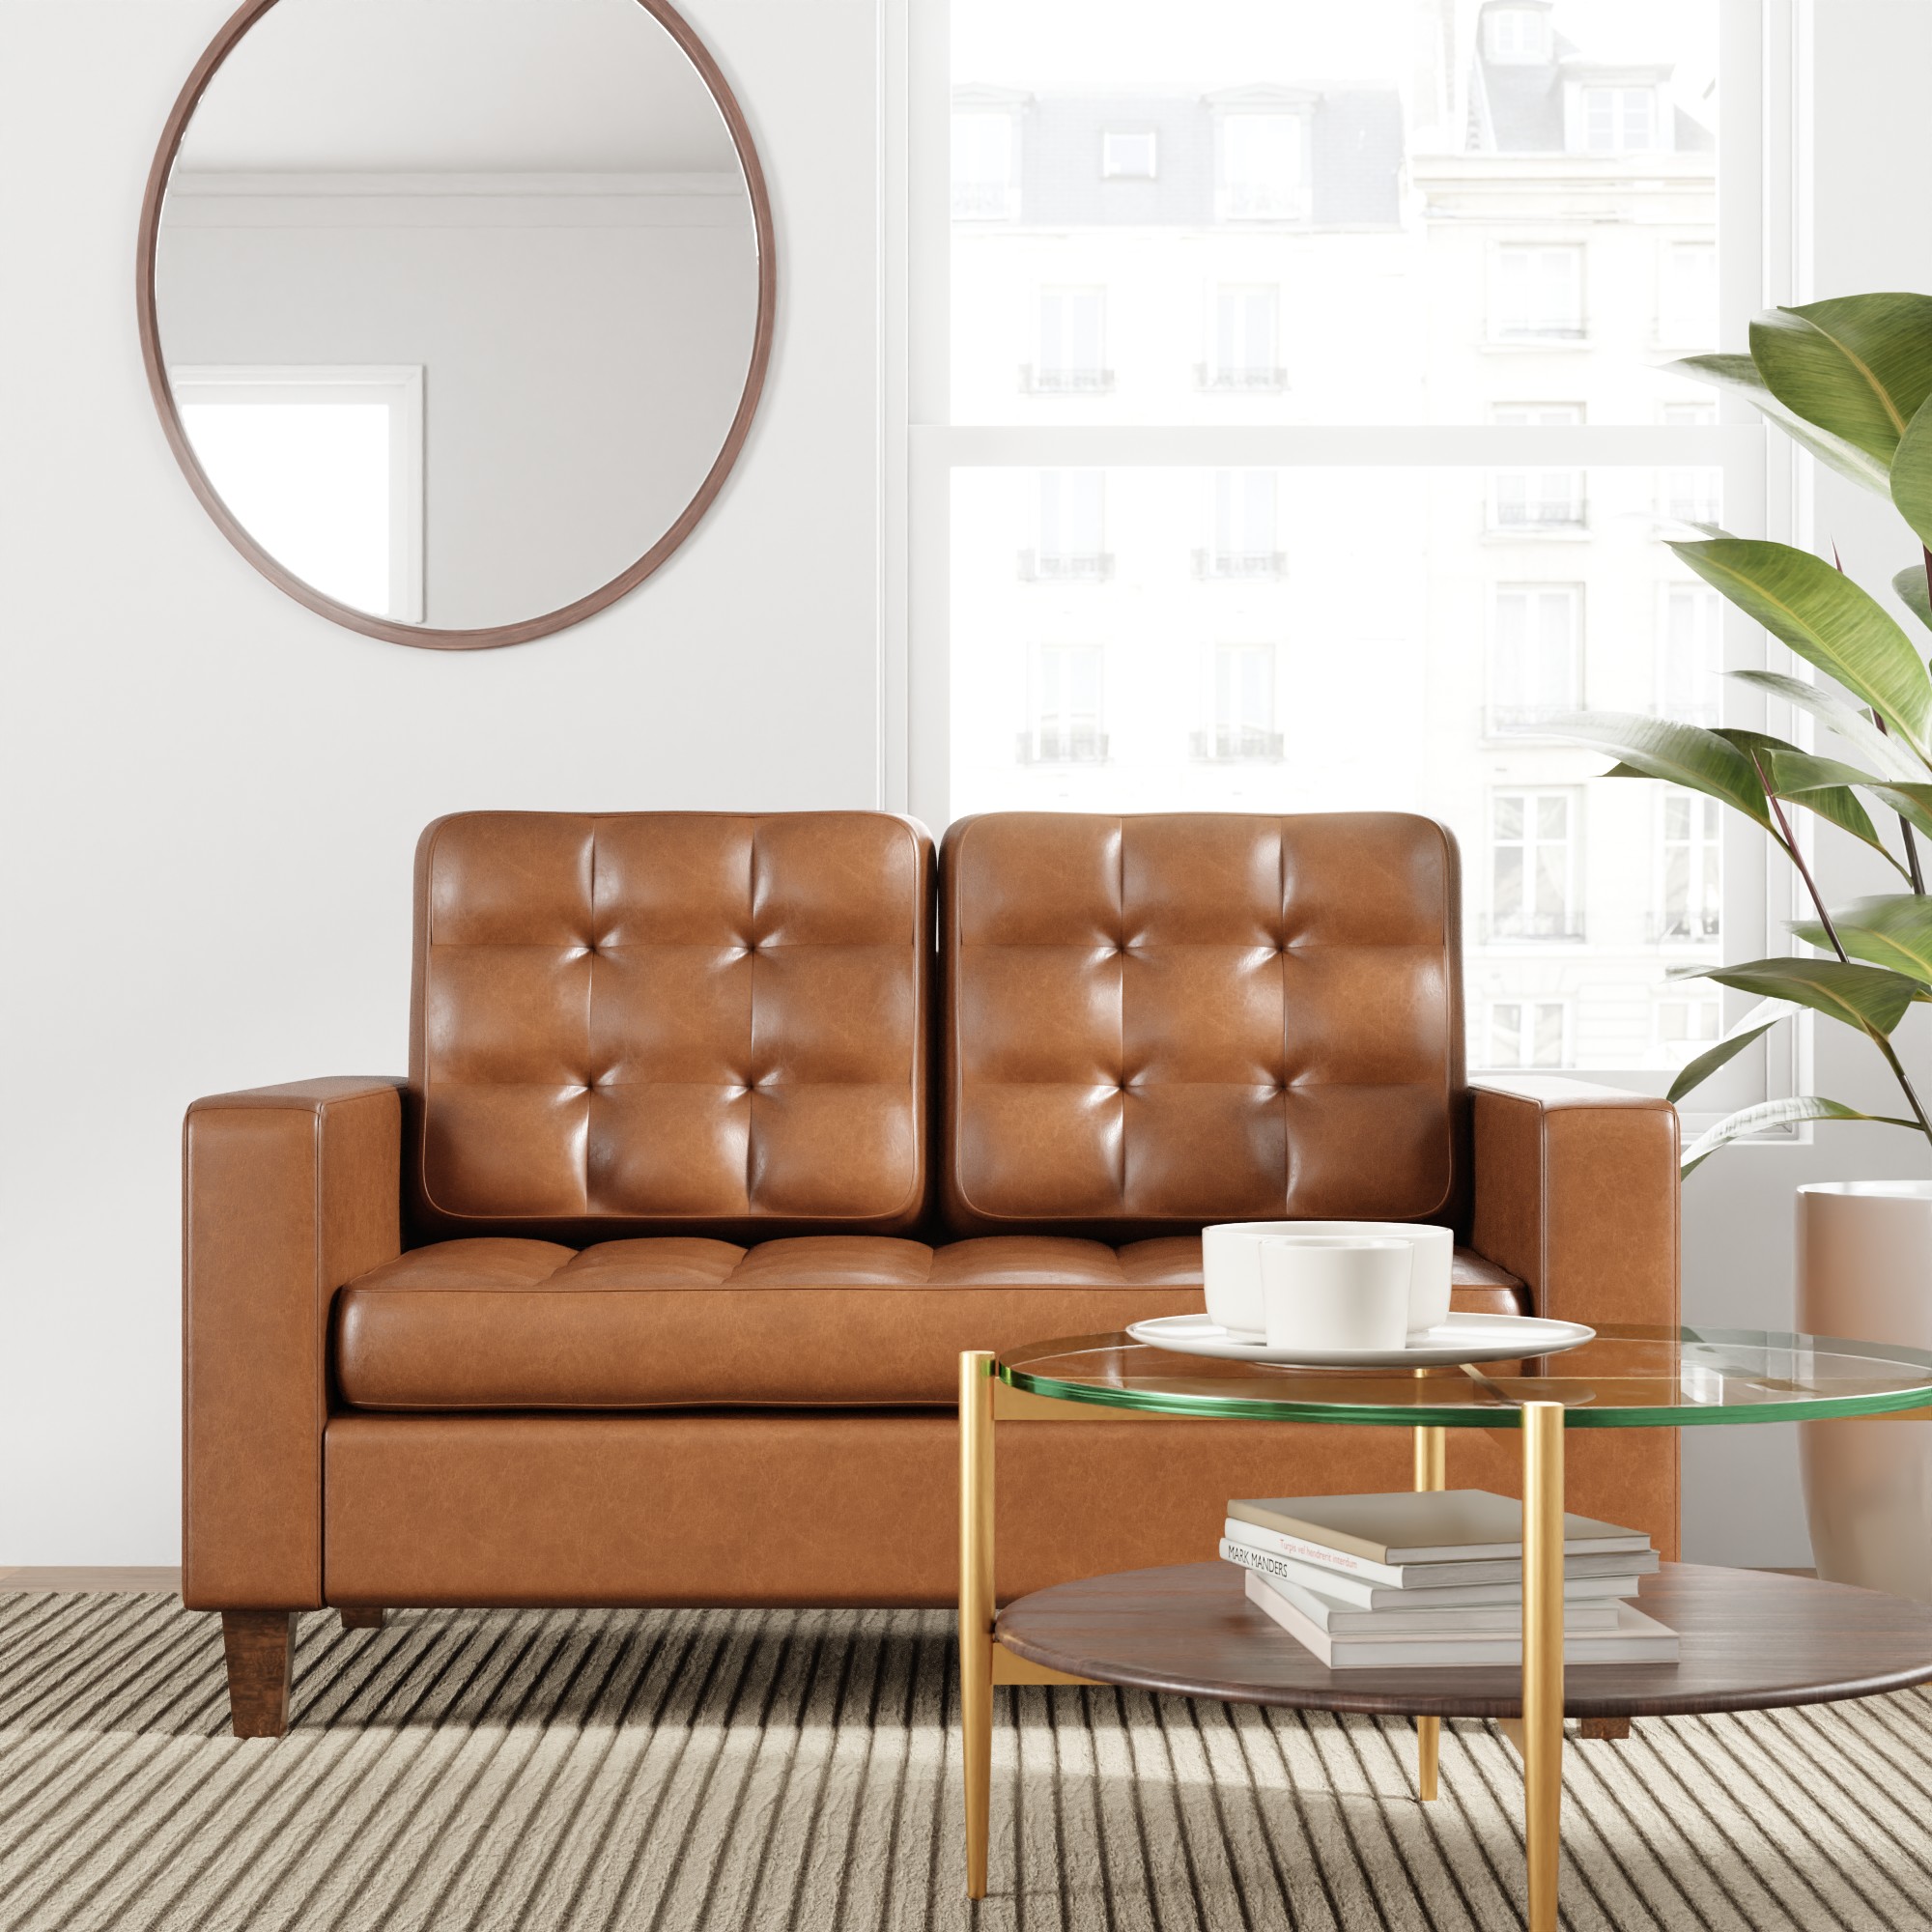 Faux Leather Loveseat In The Couches, Faux Leather Love Seat